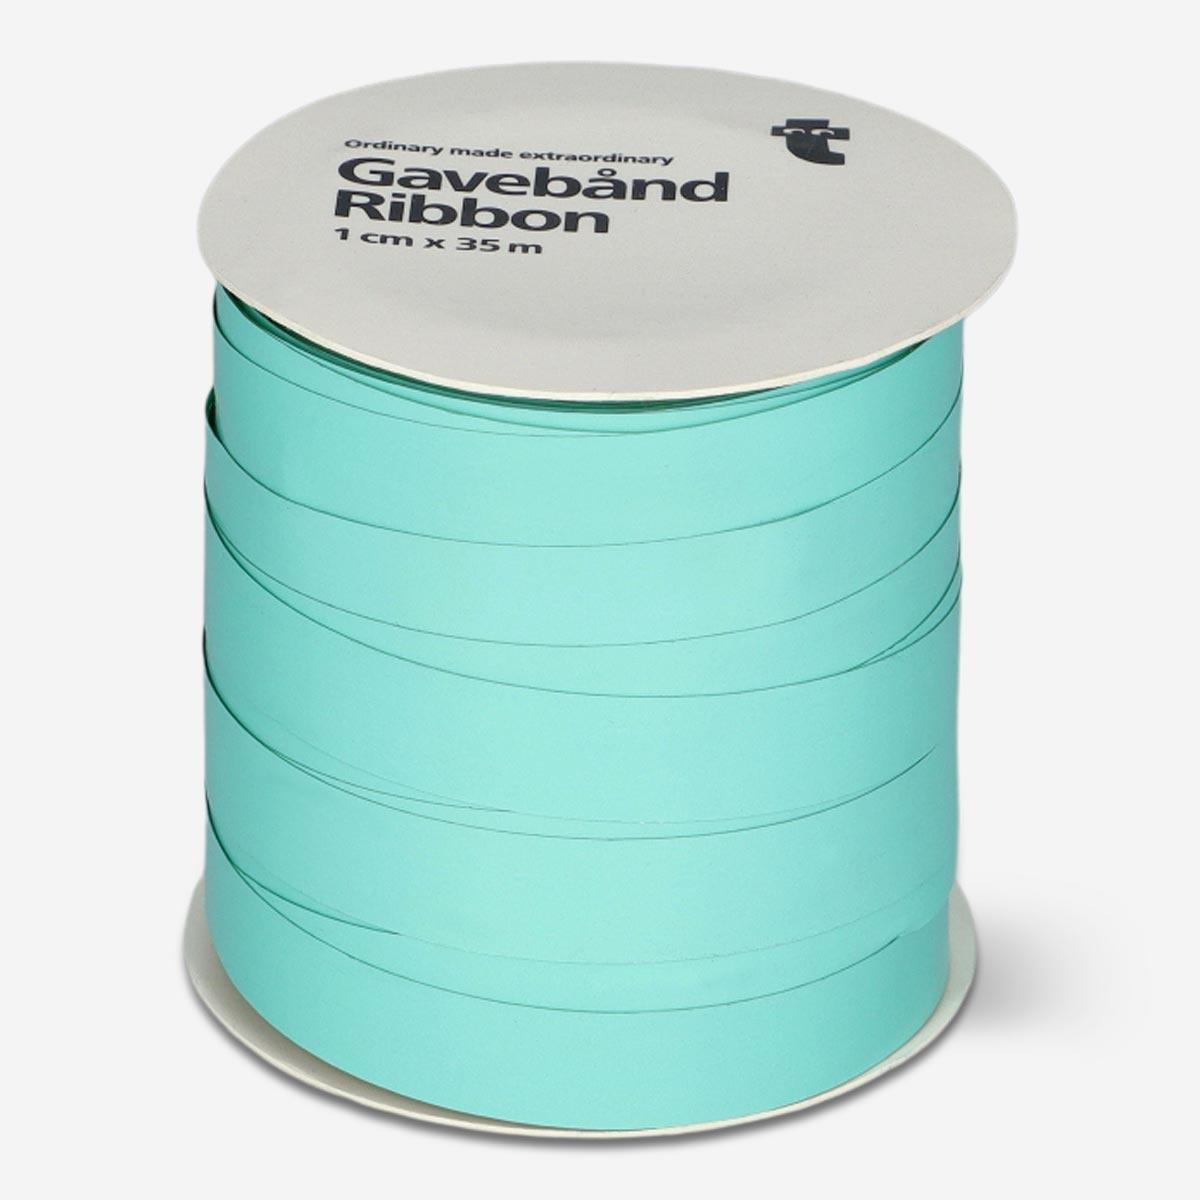 Turquoise wrapping ribbon